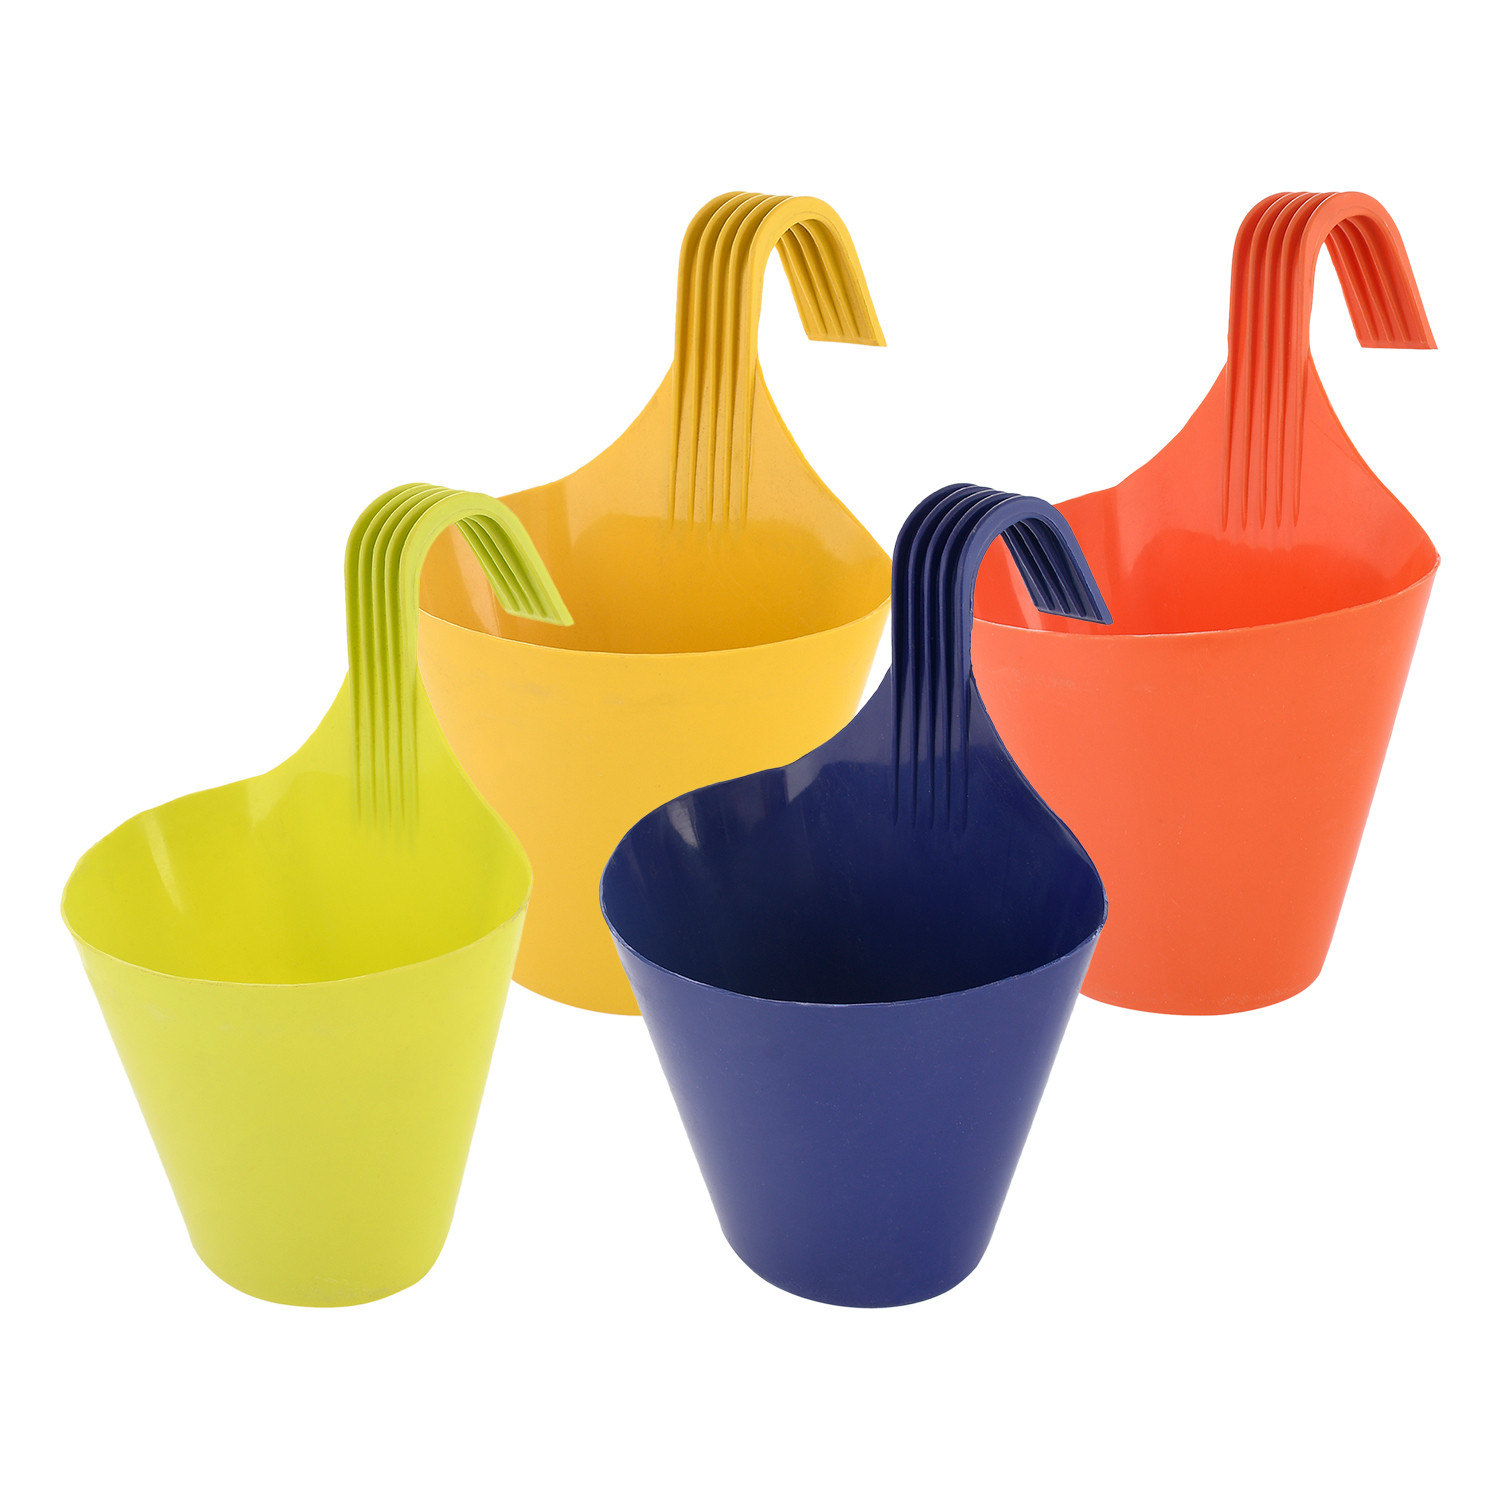 Kuber Industries Hanging Flower Pot|Single Hook Plant Container|Durable Plastic Glossy Finish Pots for Home|Balcony|Garden|9 Inch|Pack of 4 (Multicolor)